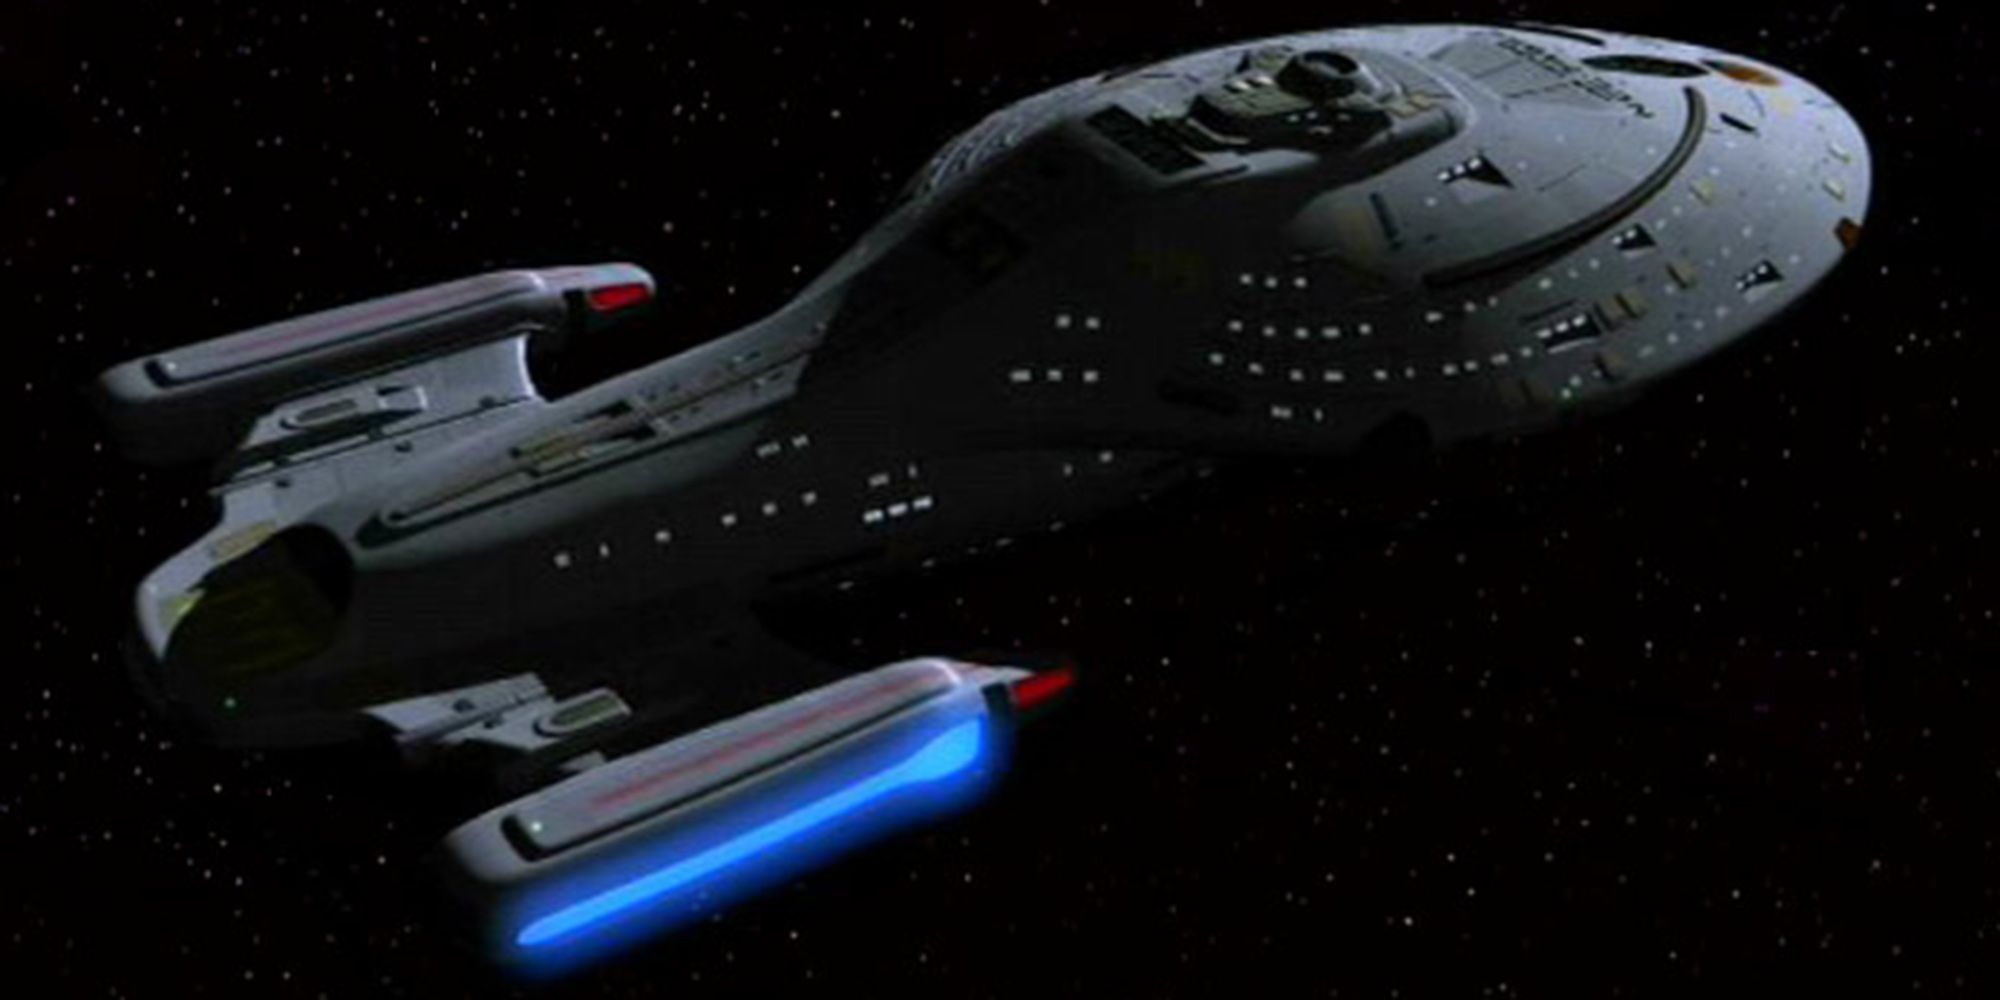 A picture is shown of the USS Voyager in space.